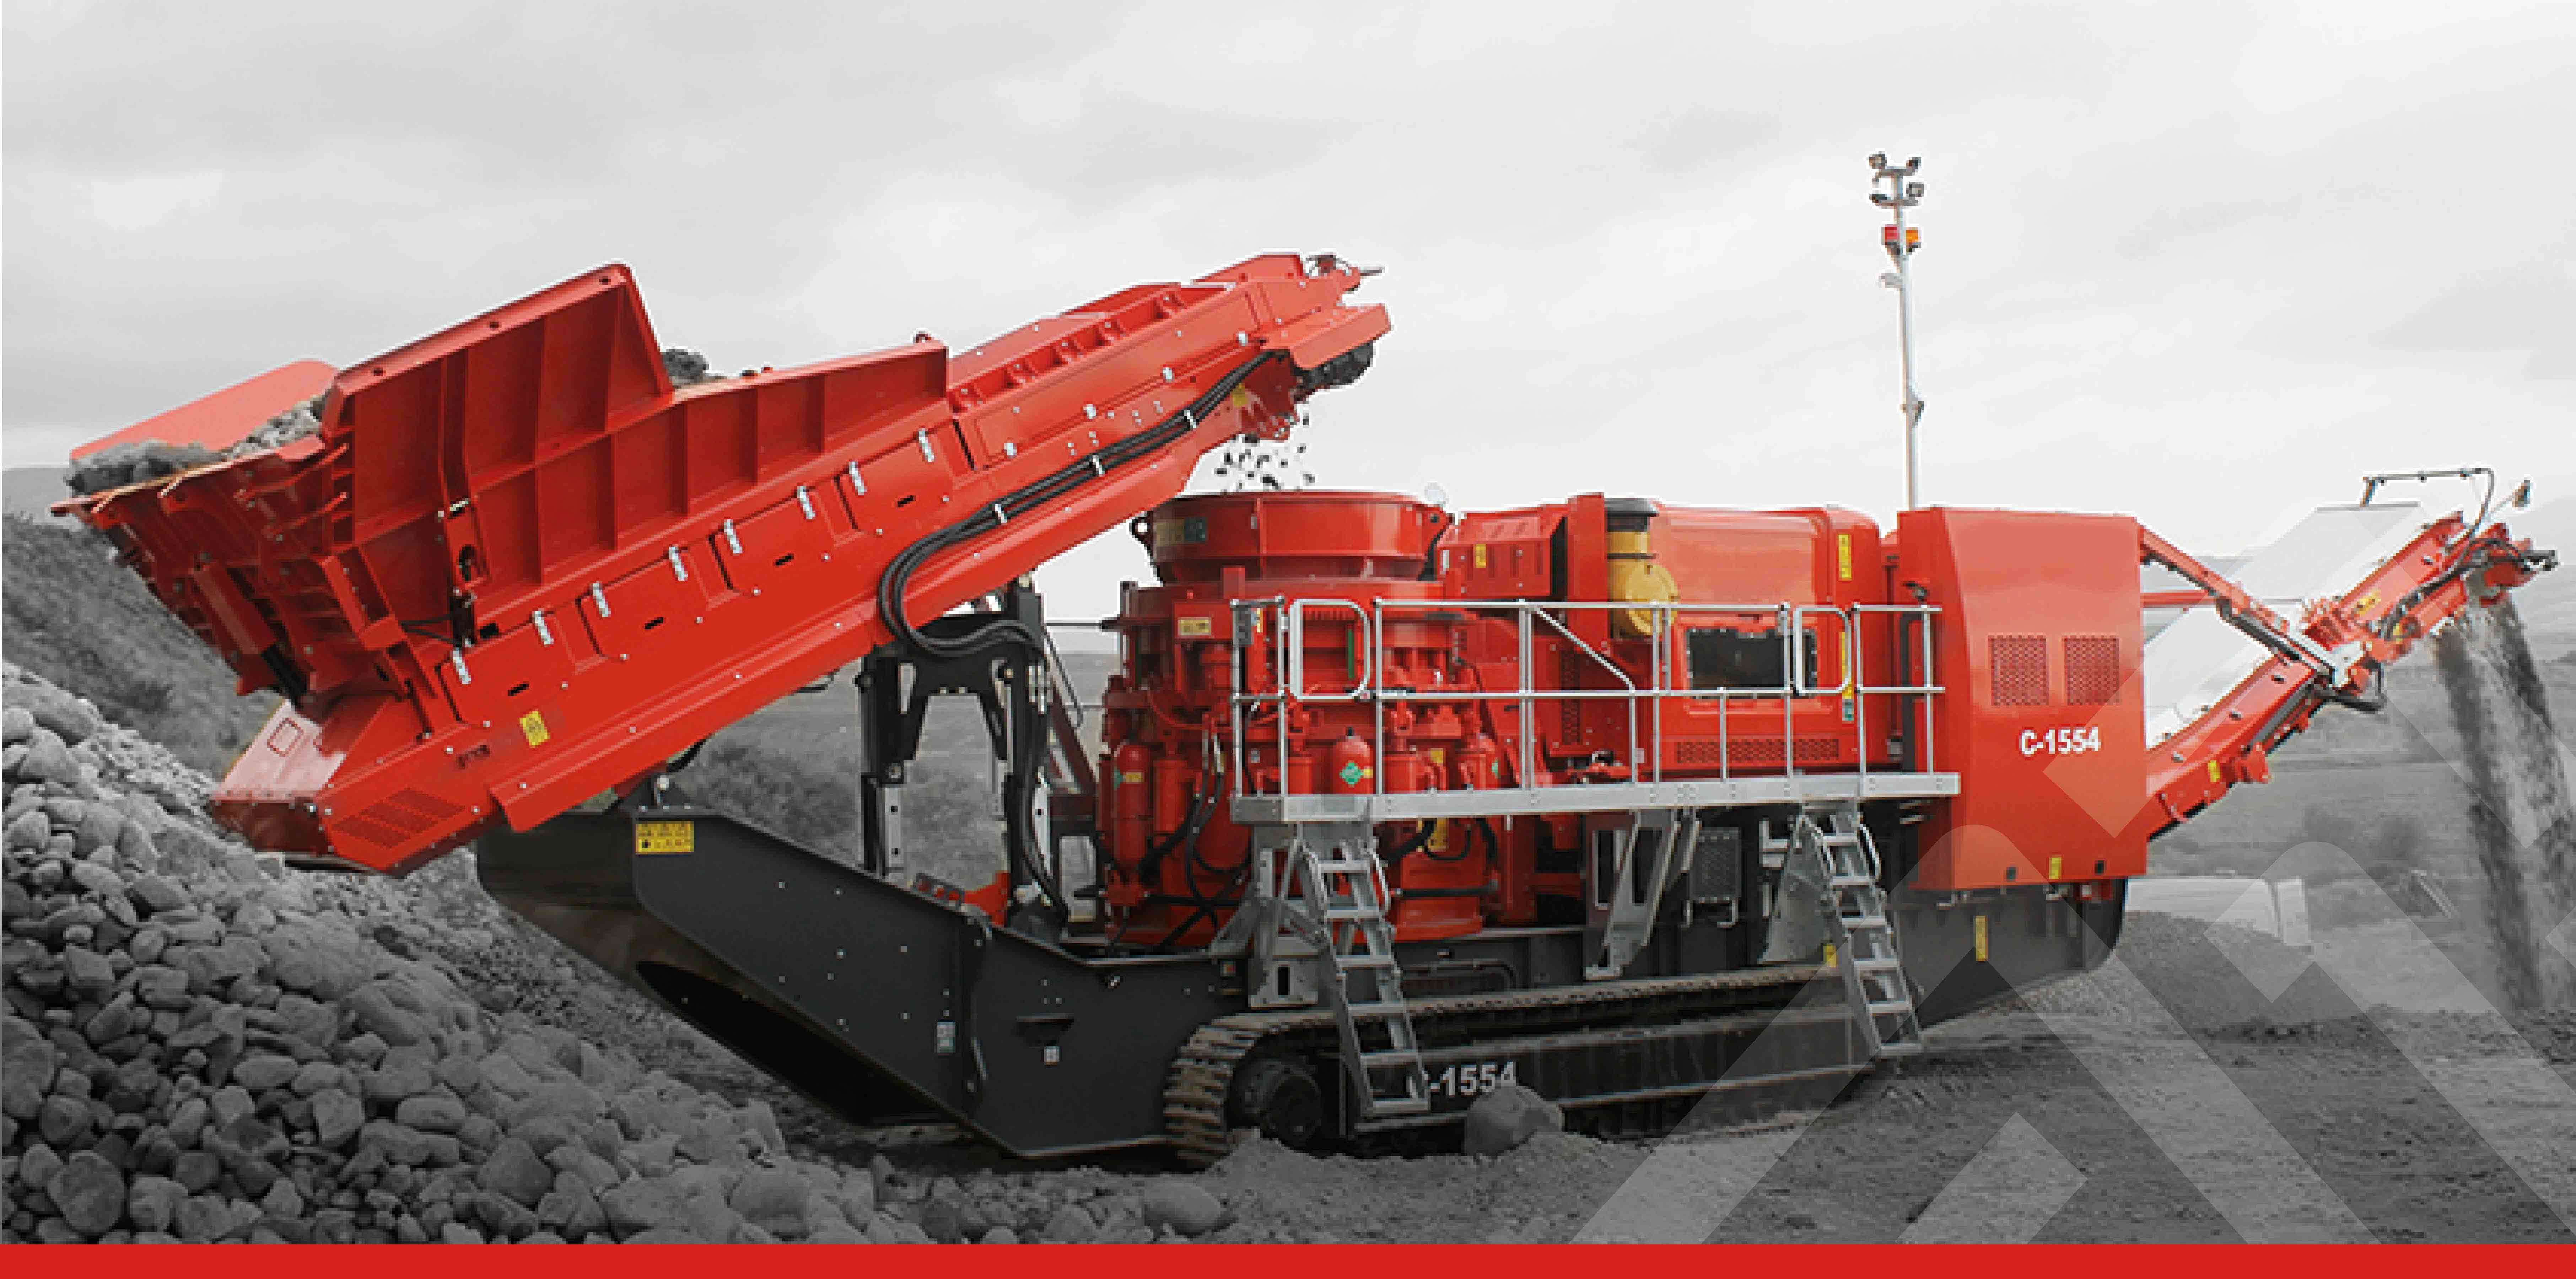 c1554-mobile-cone-stone-crushing-plant